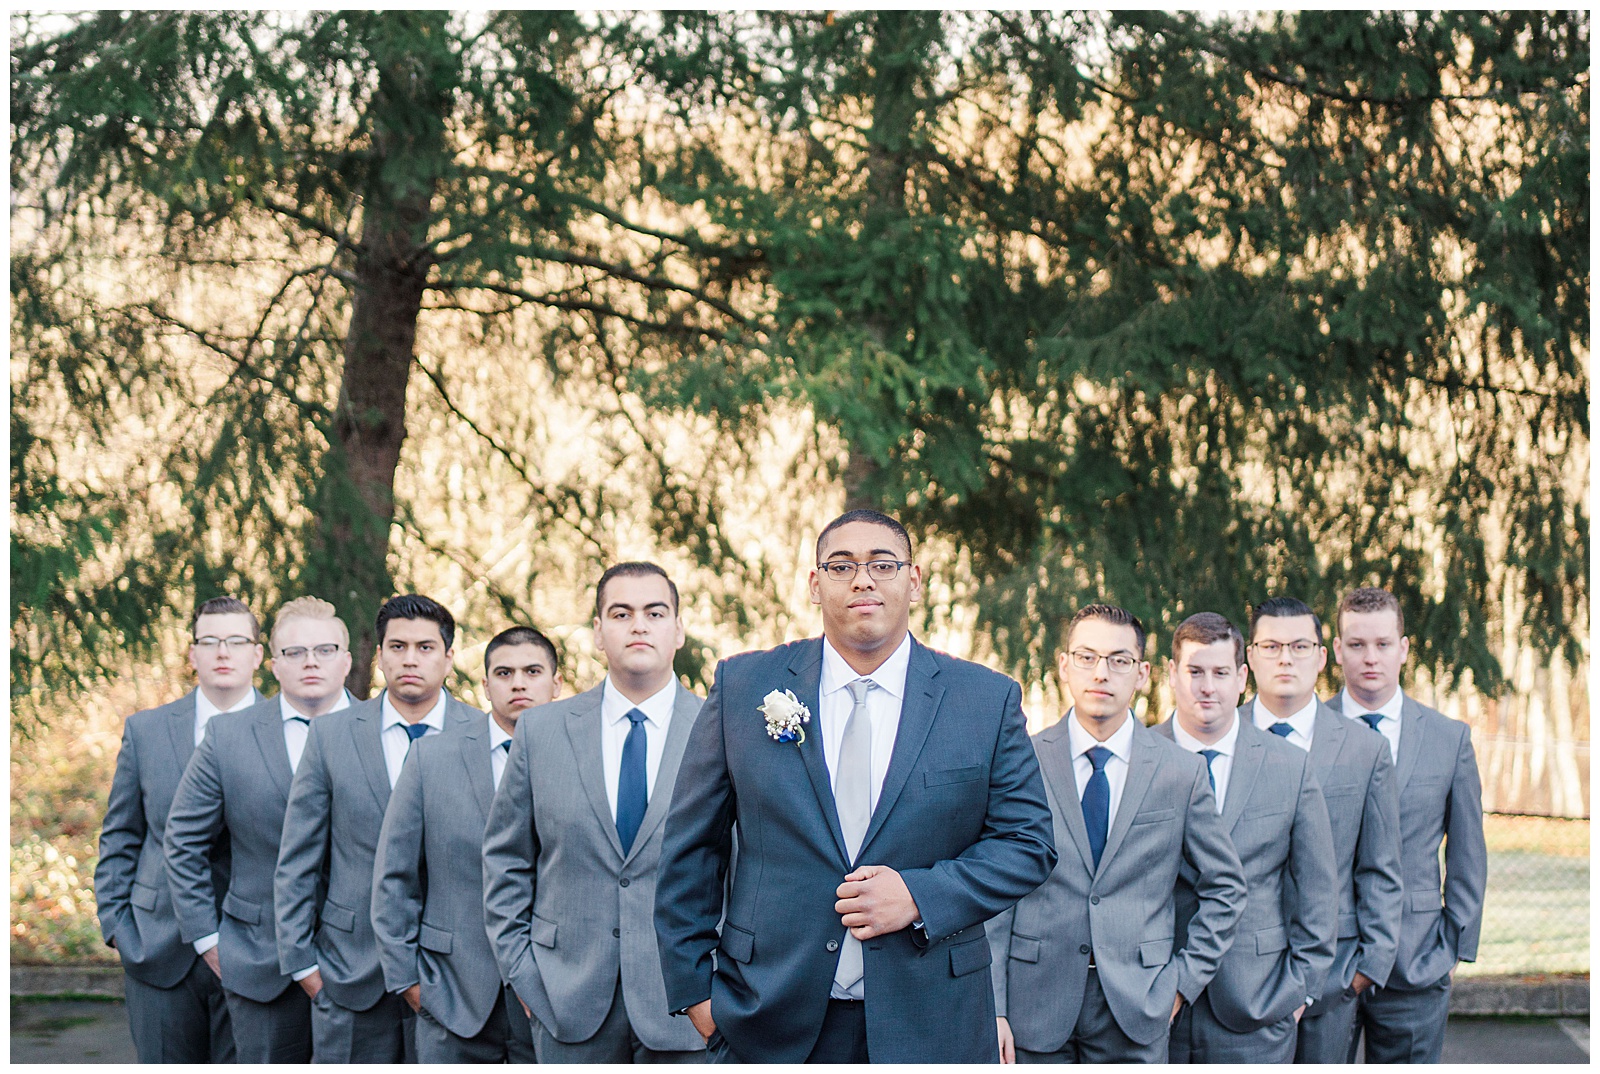 Groom with groomsmen in gray and blue suits